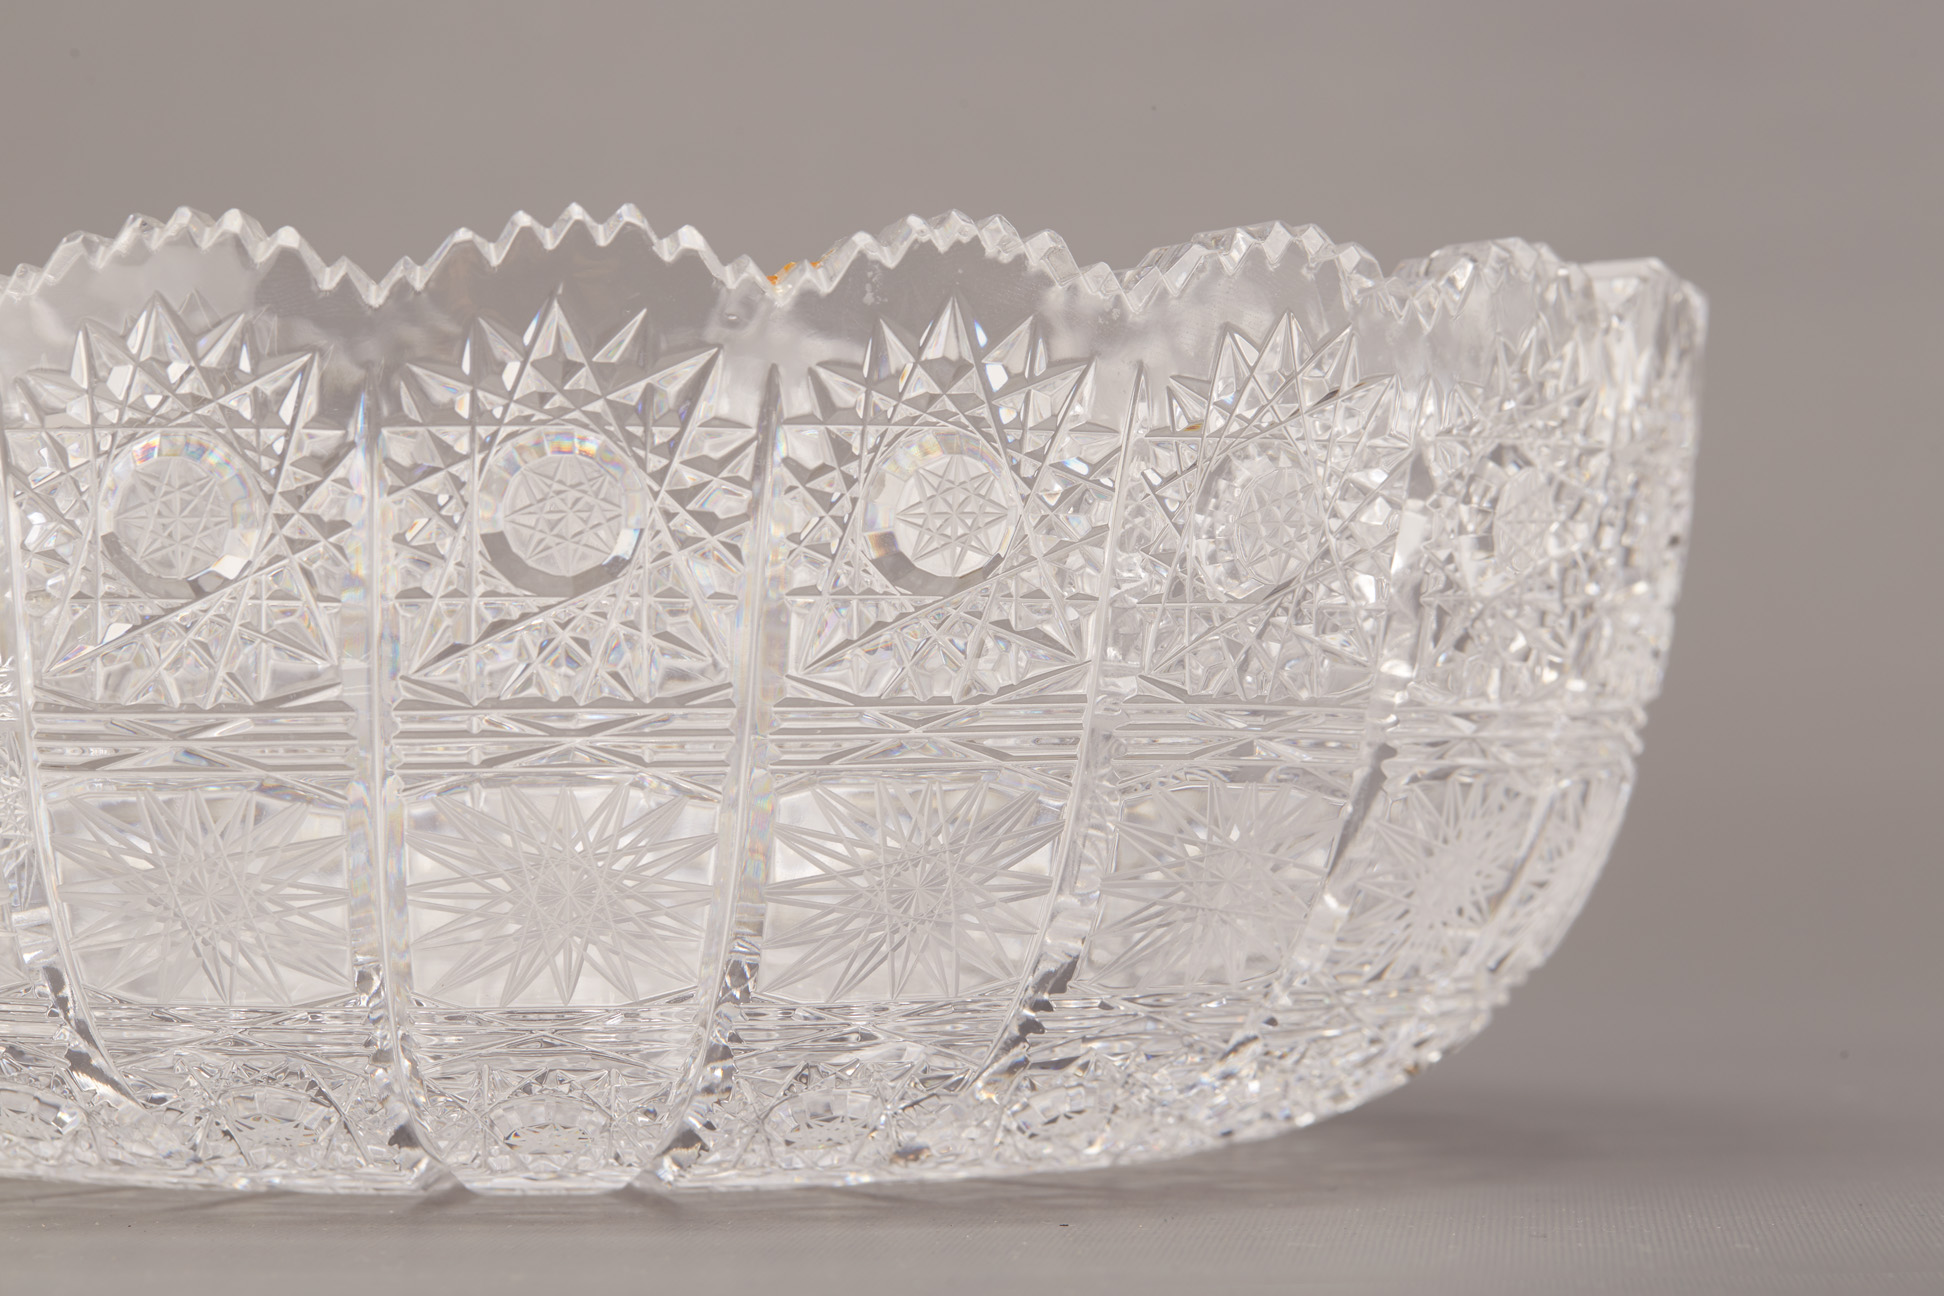 A LARGE CUT CRYSTAL BOWL - Image 2 of 2